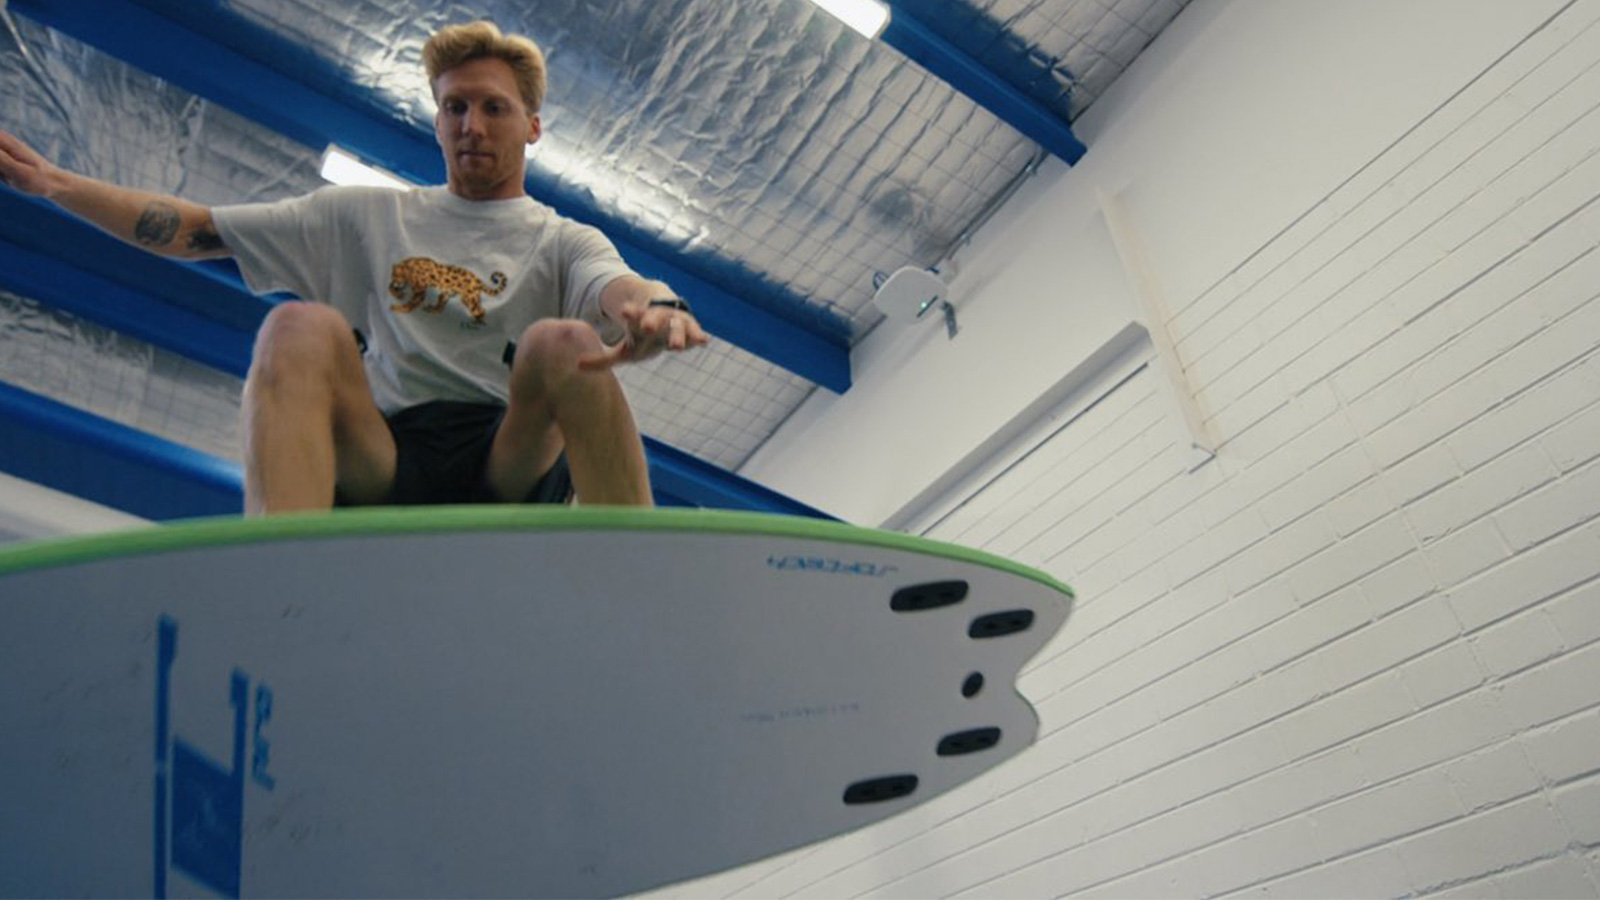 Brett Connellan is in an exercise lab performing an aerial on a surfboard.